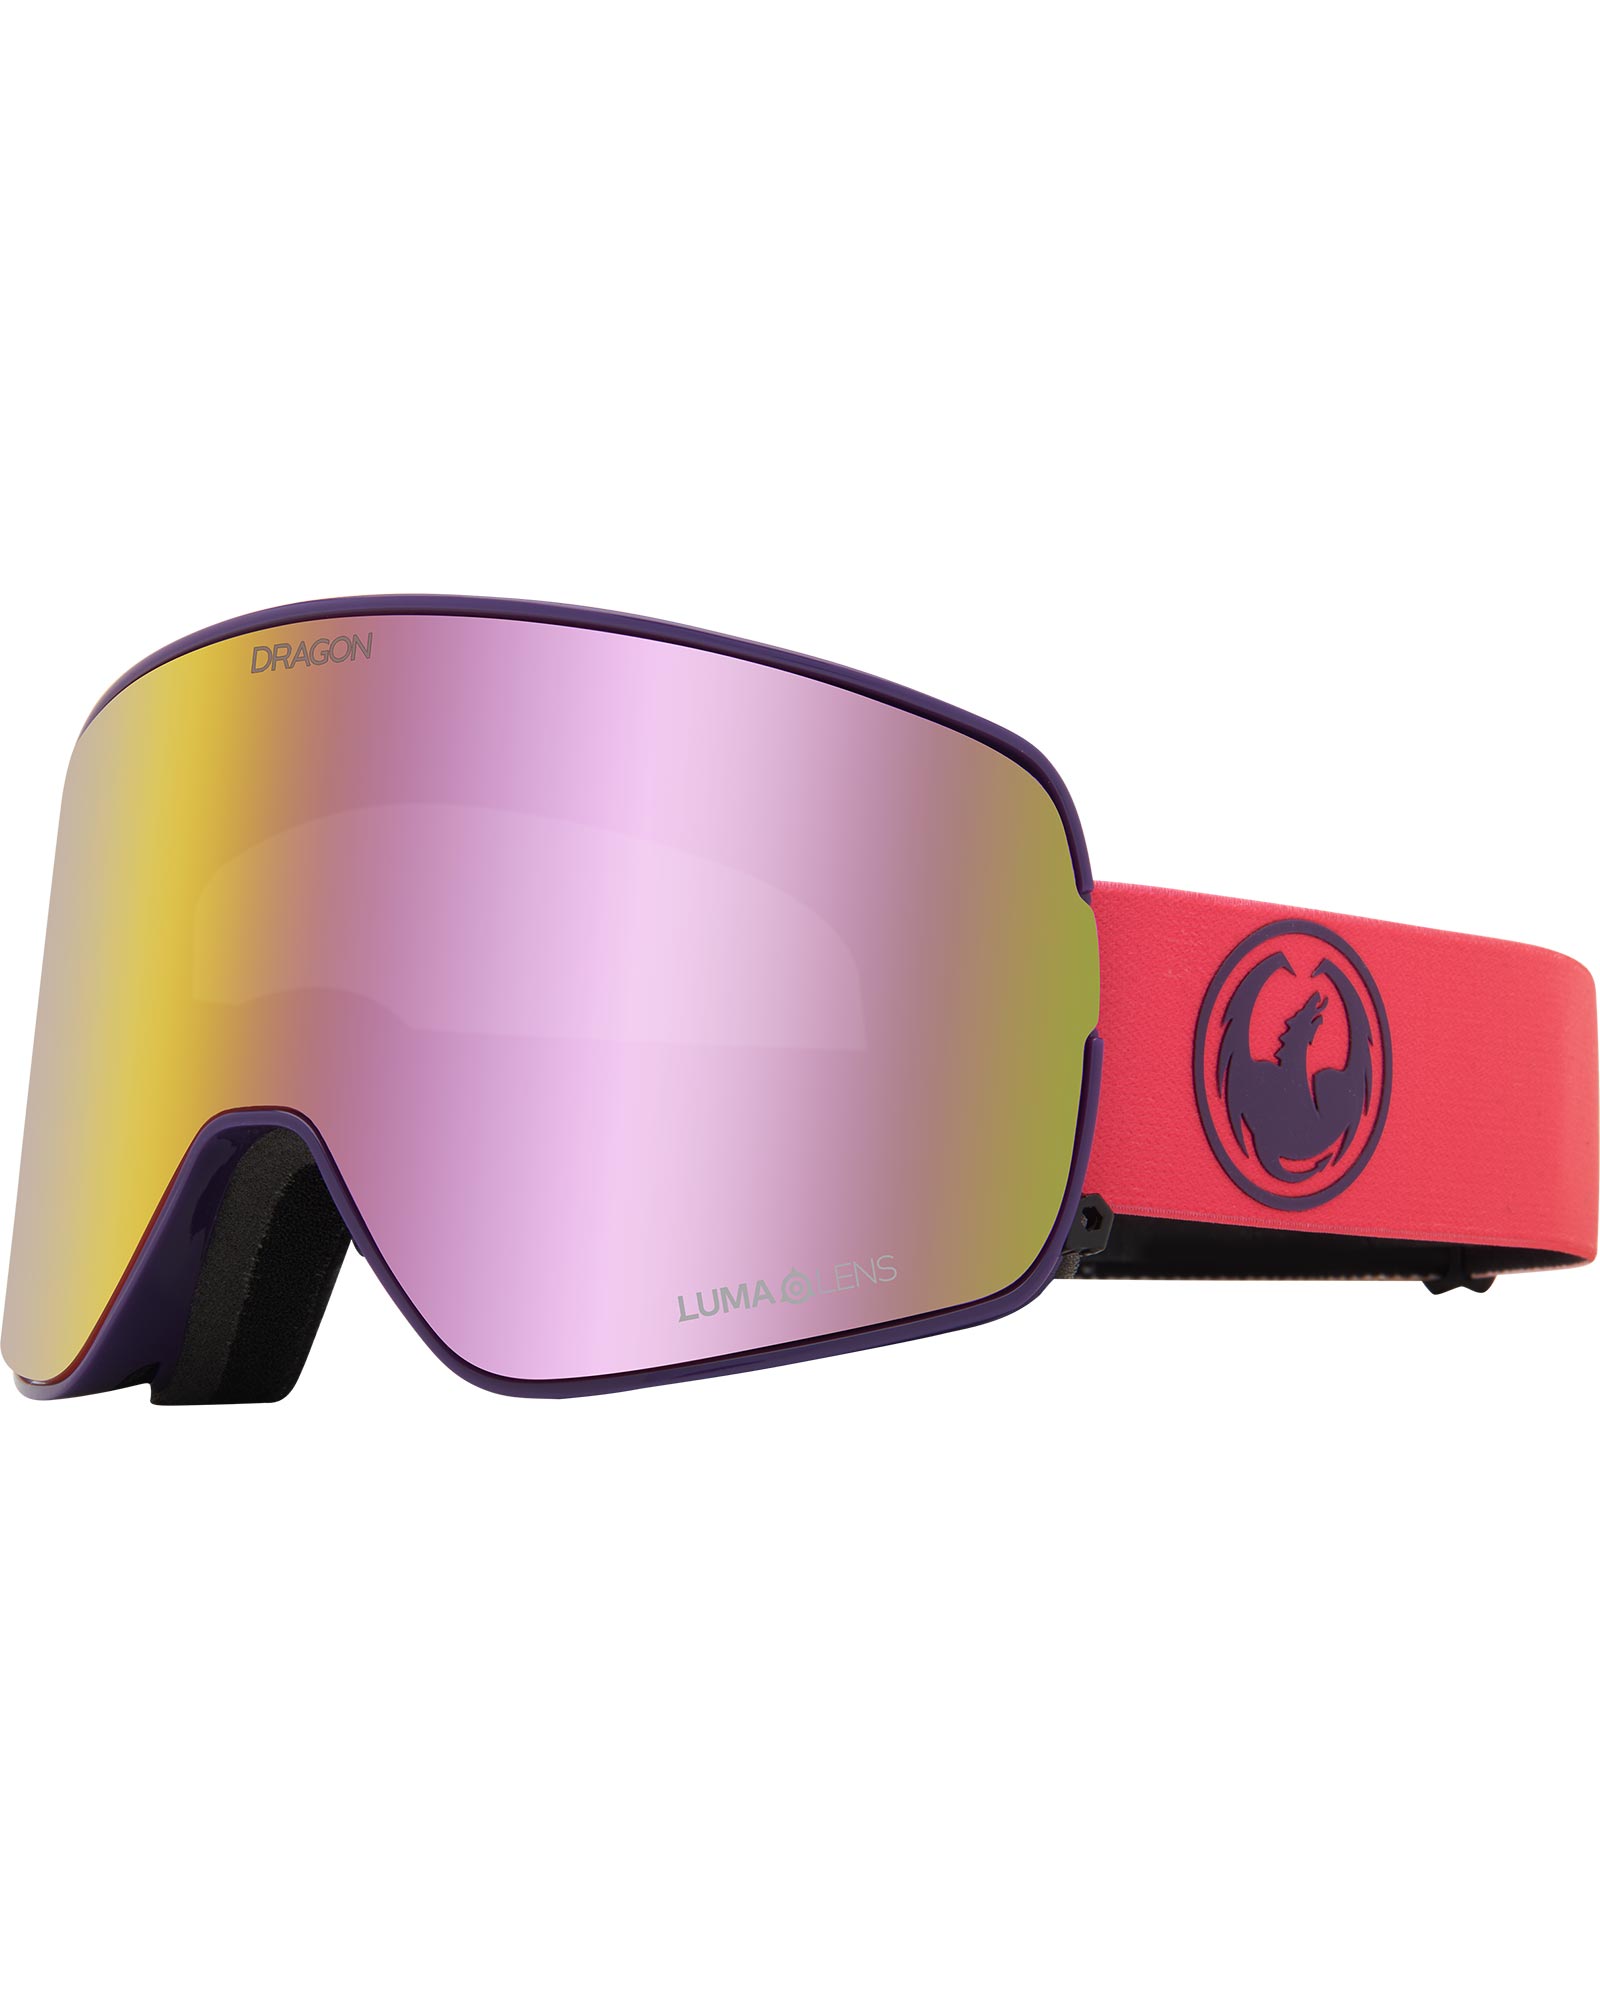 Dragon Nfx2 Fade Pink / Lumalens Pink Ionized + Lumalens Rose Goggles